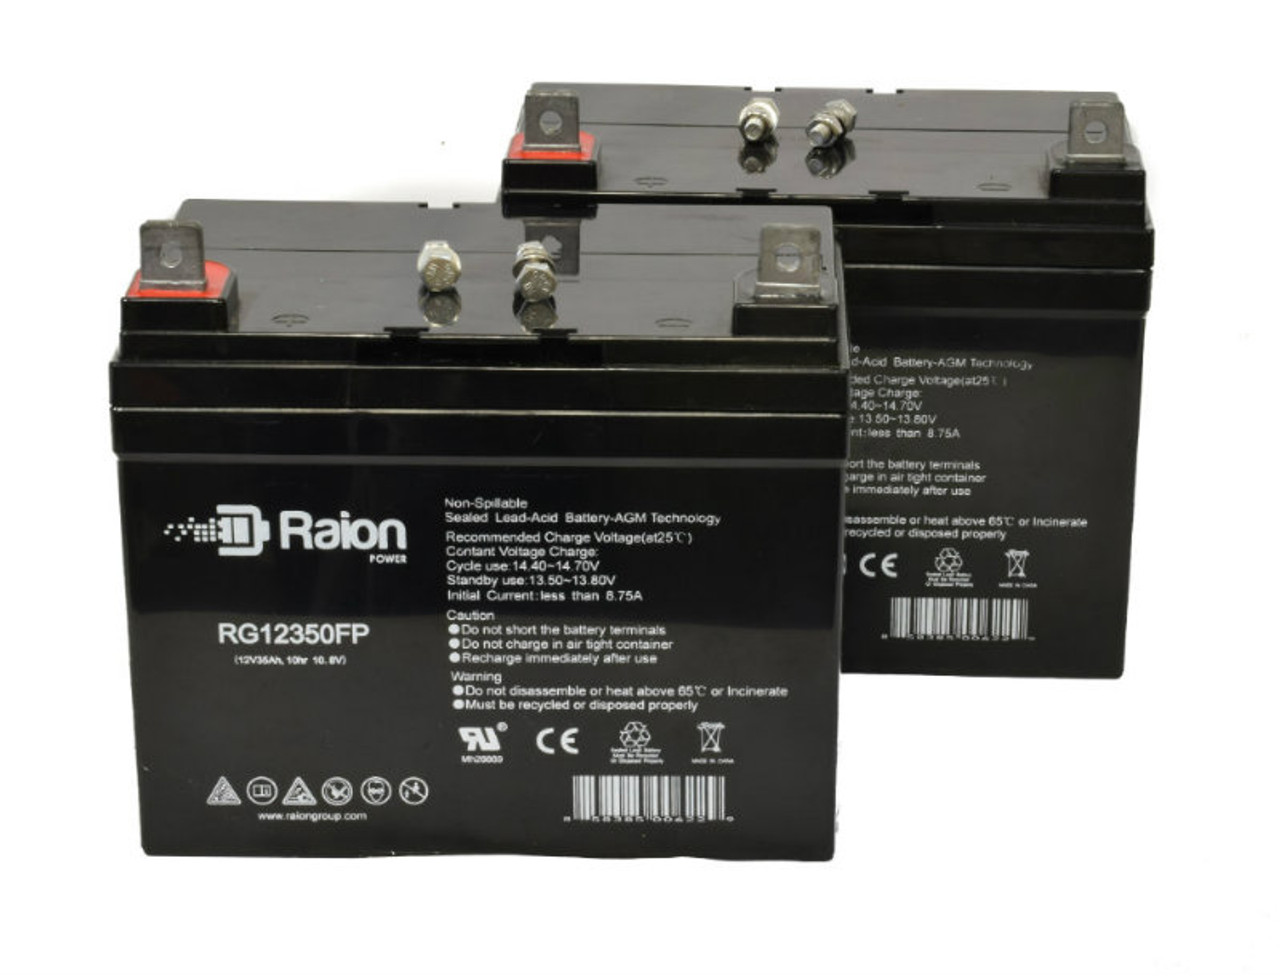 Raion Power Replacement 12V 35Ah Lawn Mower Battery for Ingersol Equipment 6018 - 2 Pack